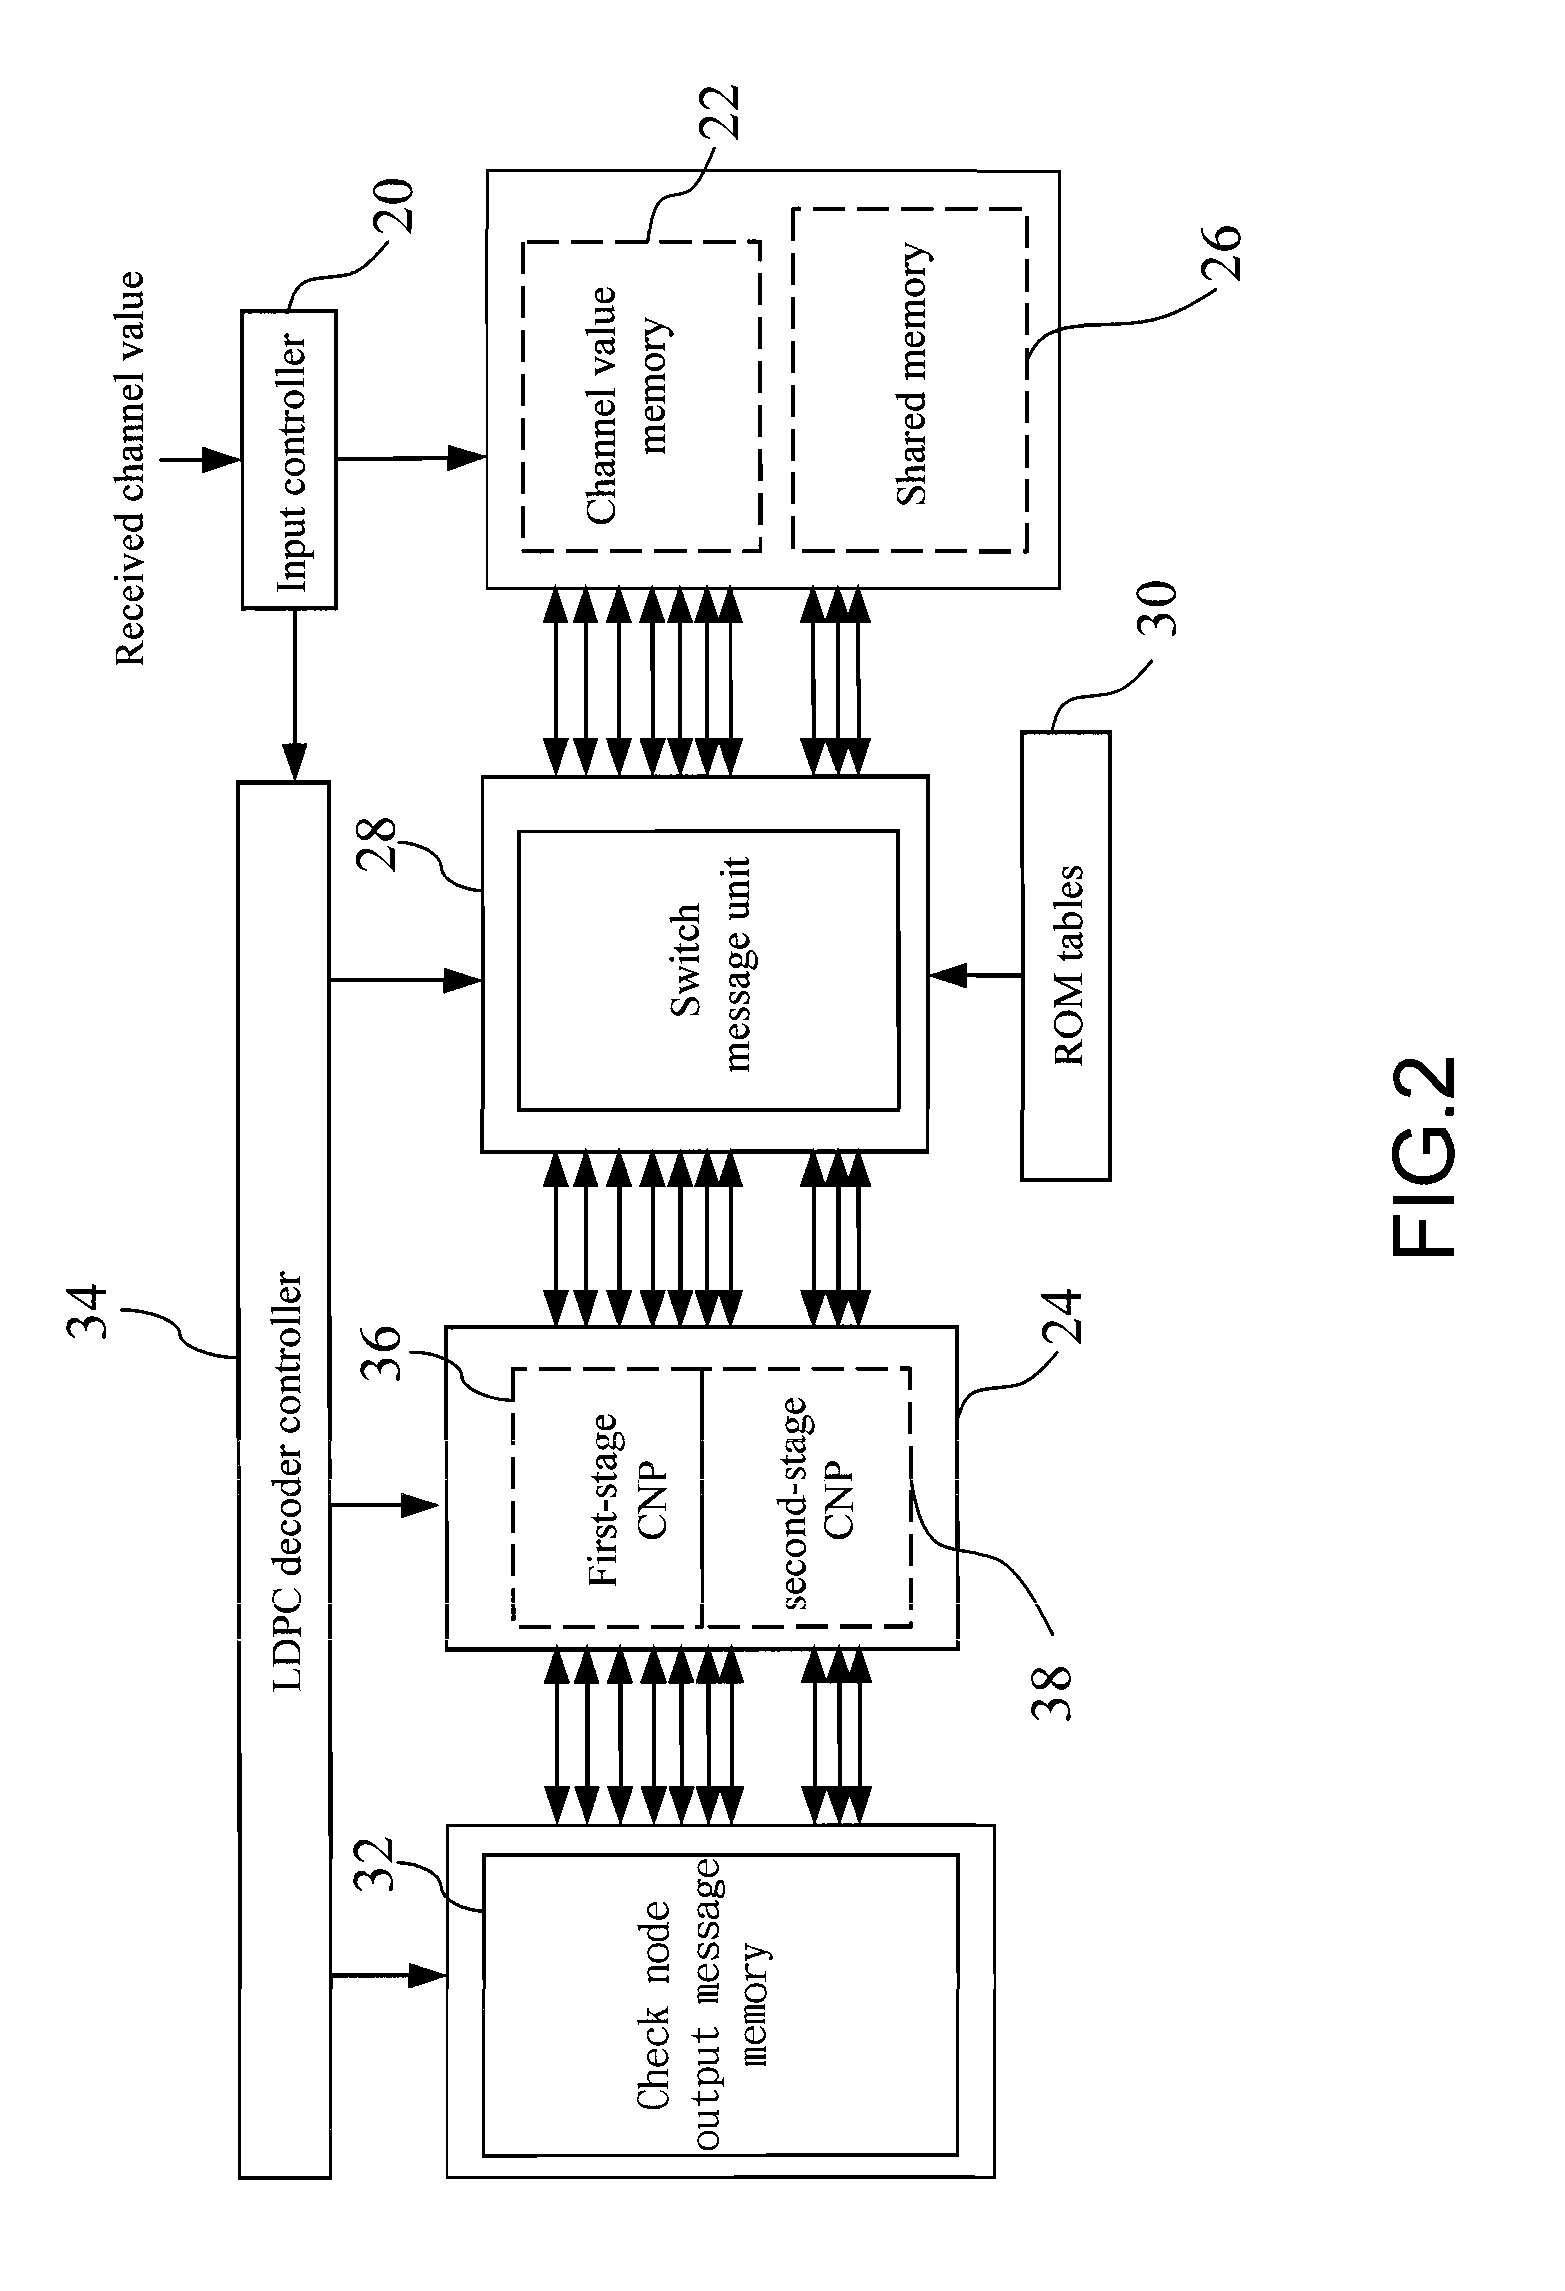 Operating method and circuit for low density parity check (LDPC) decoder